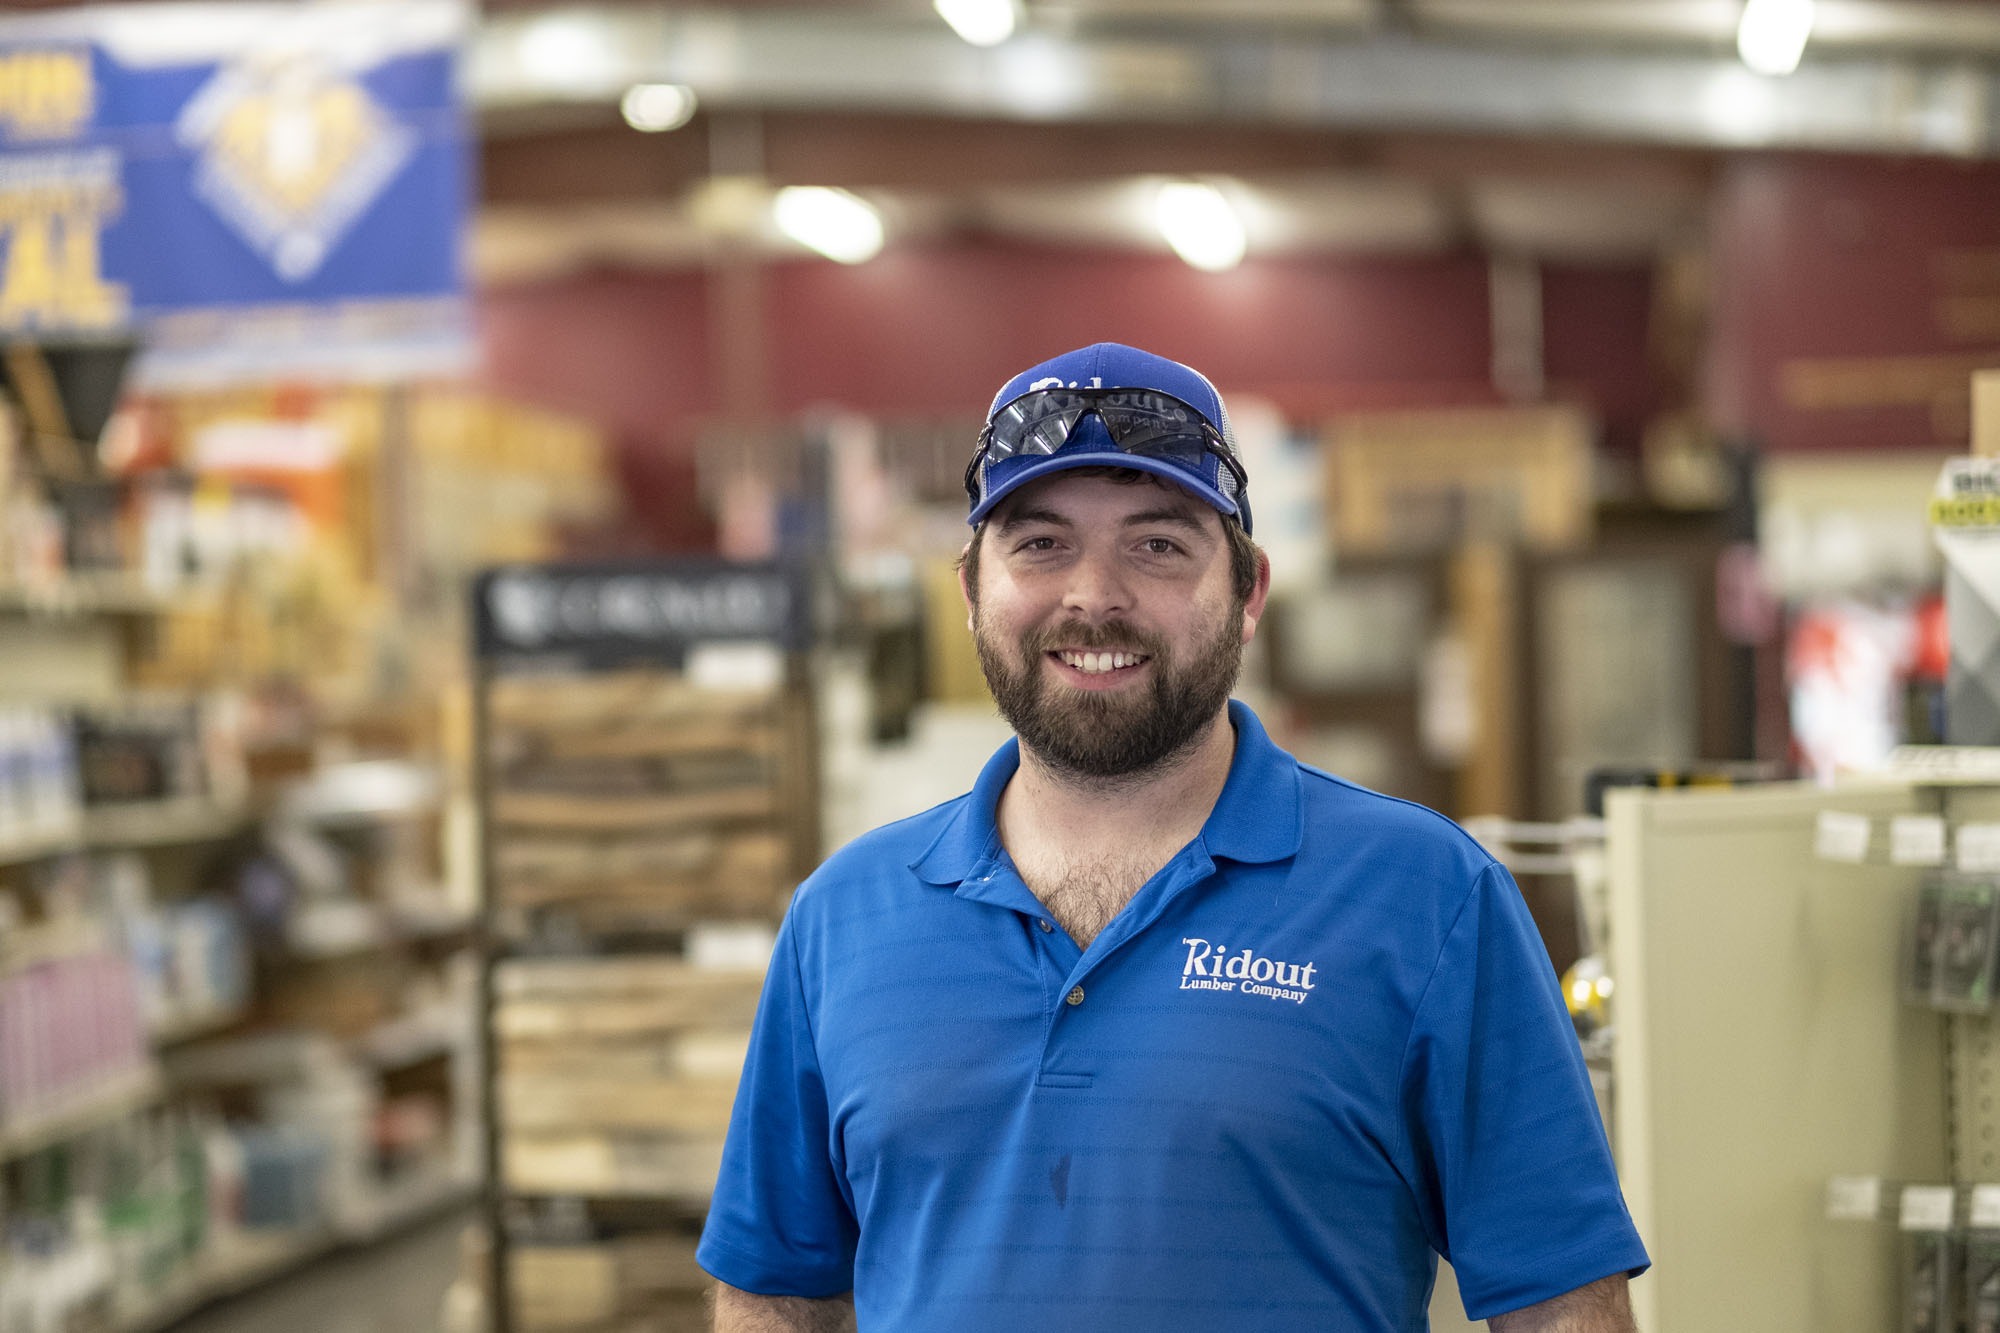 Smiling man with blue shirt and hat in a hardware store